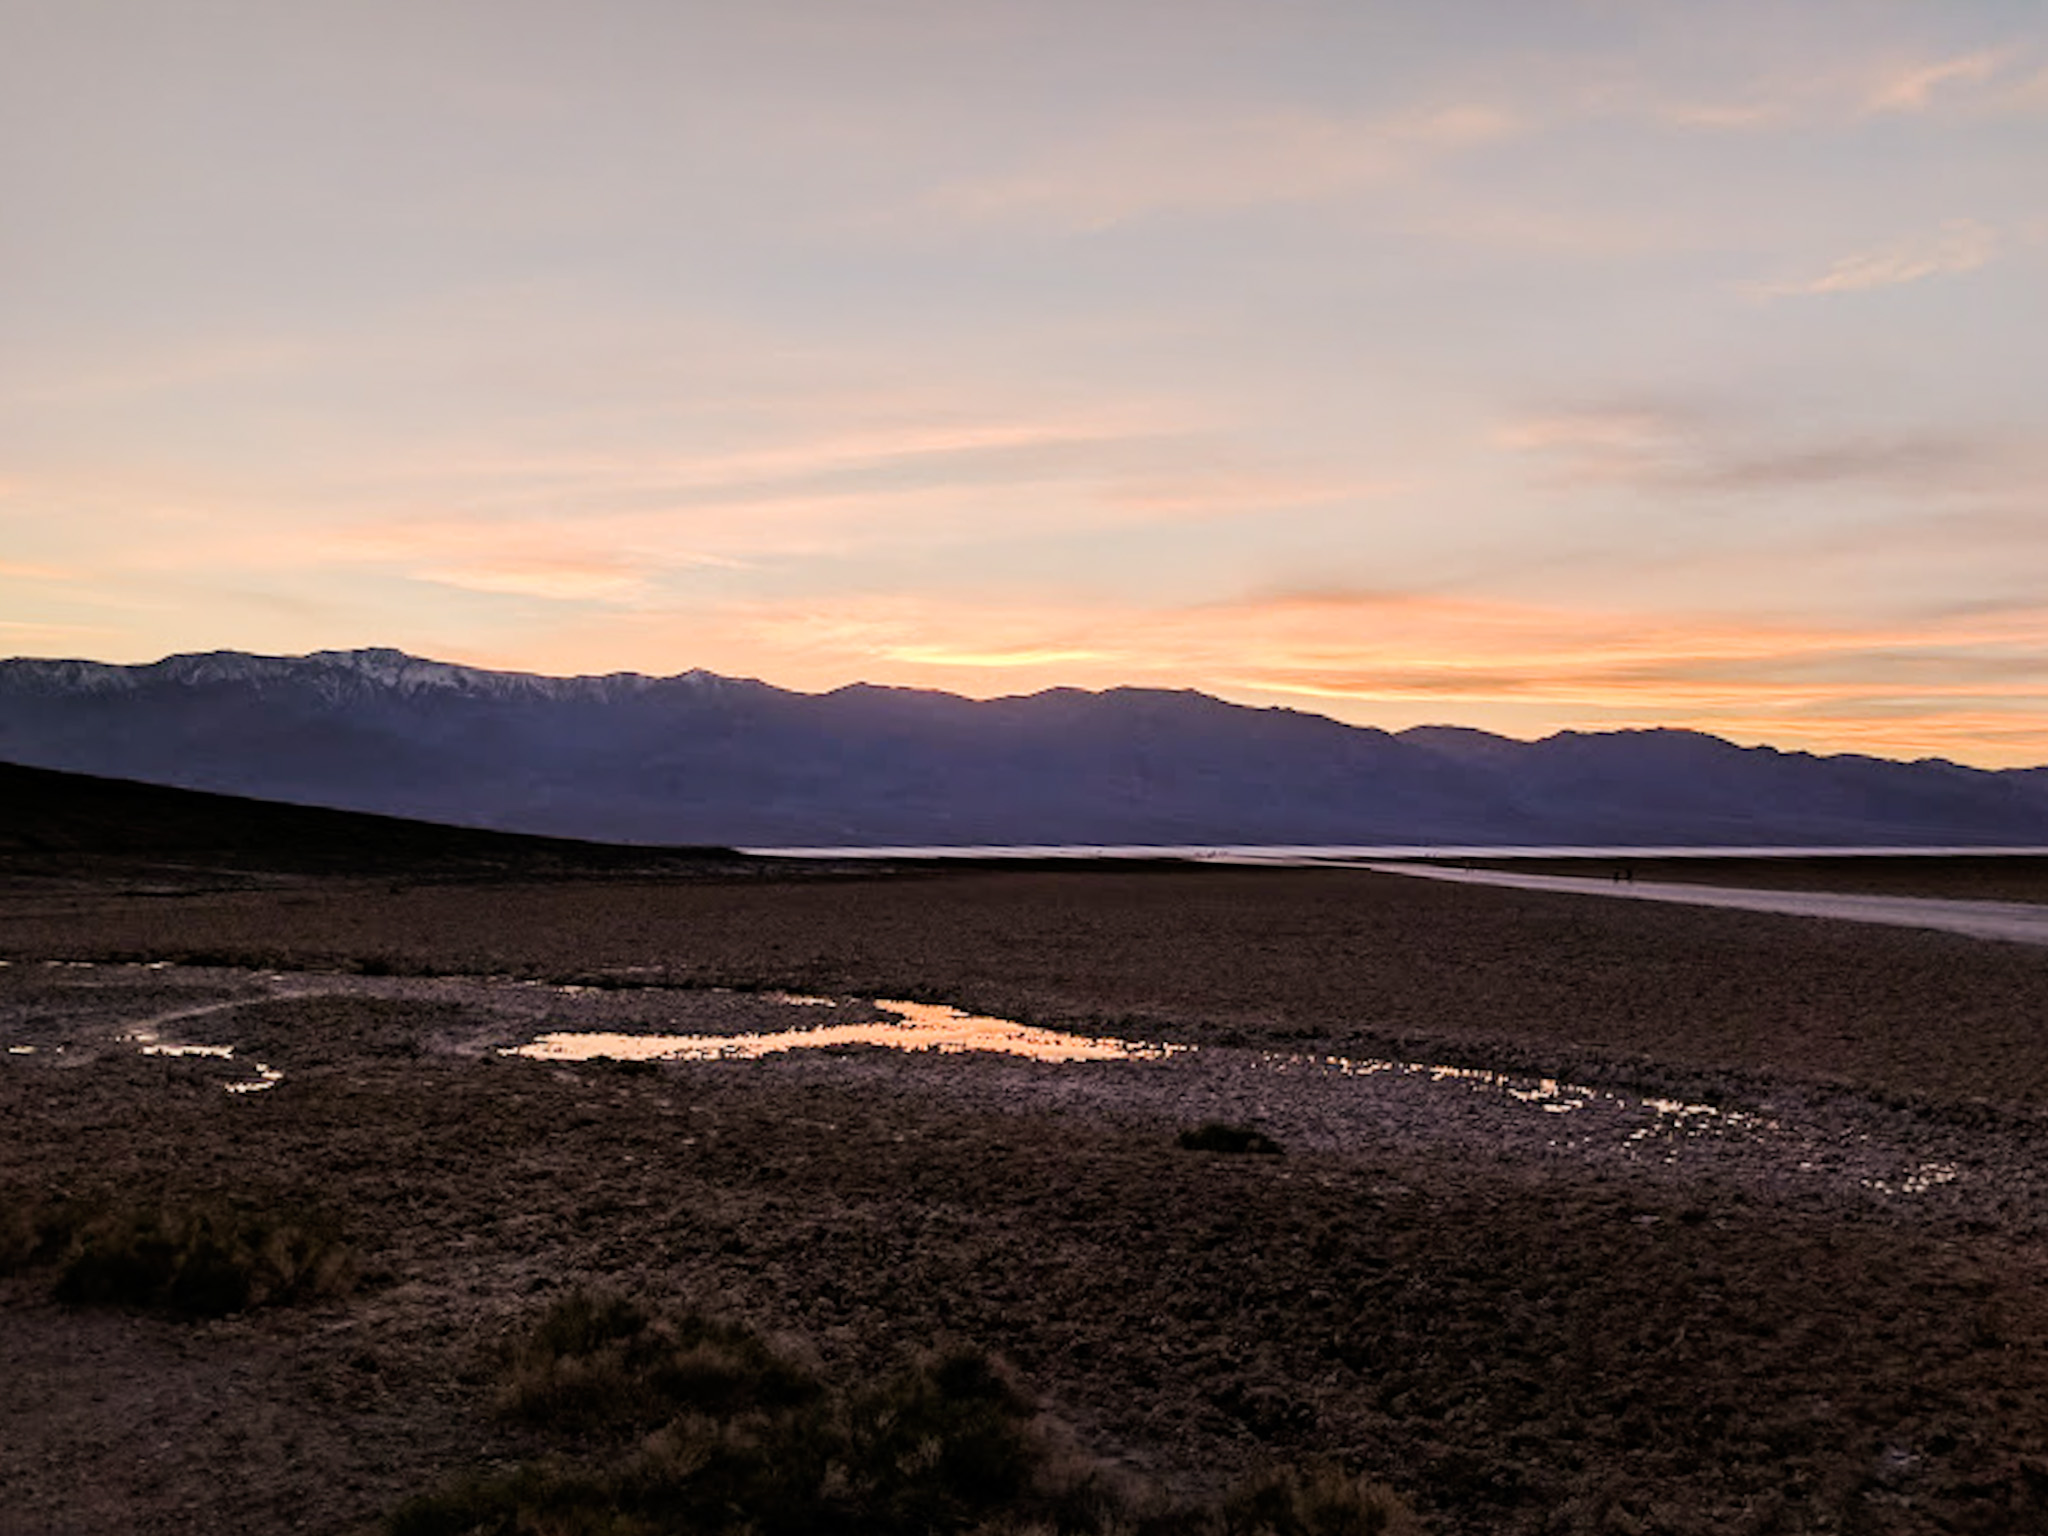 sunset in death valley national park